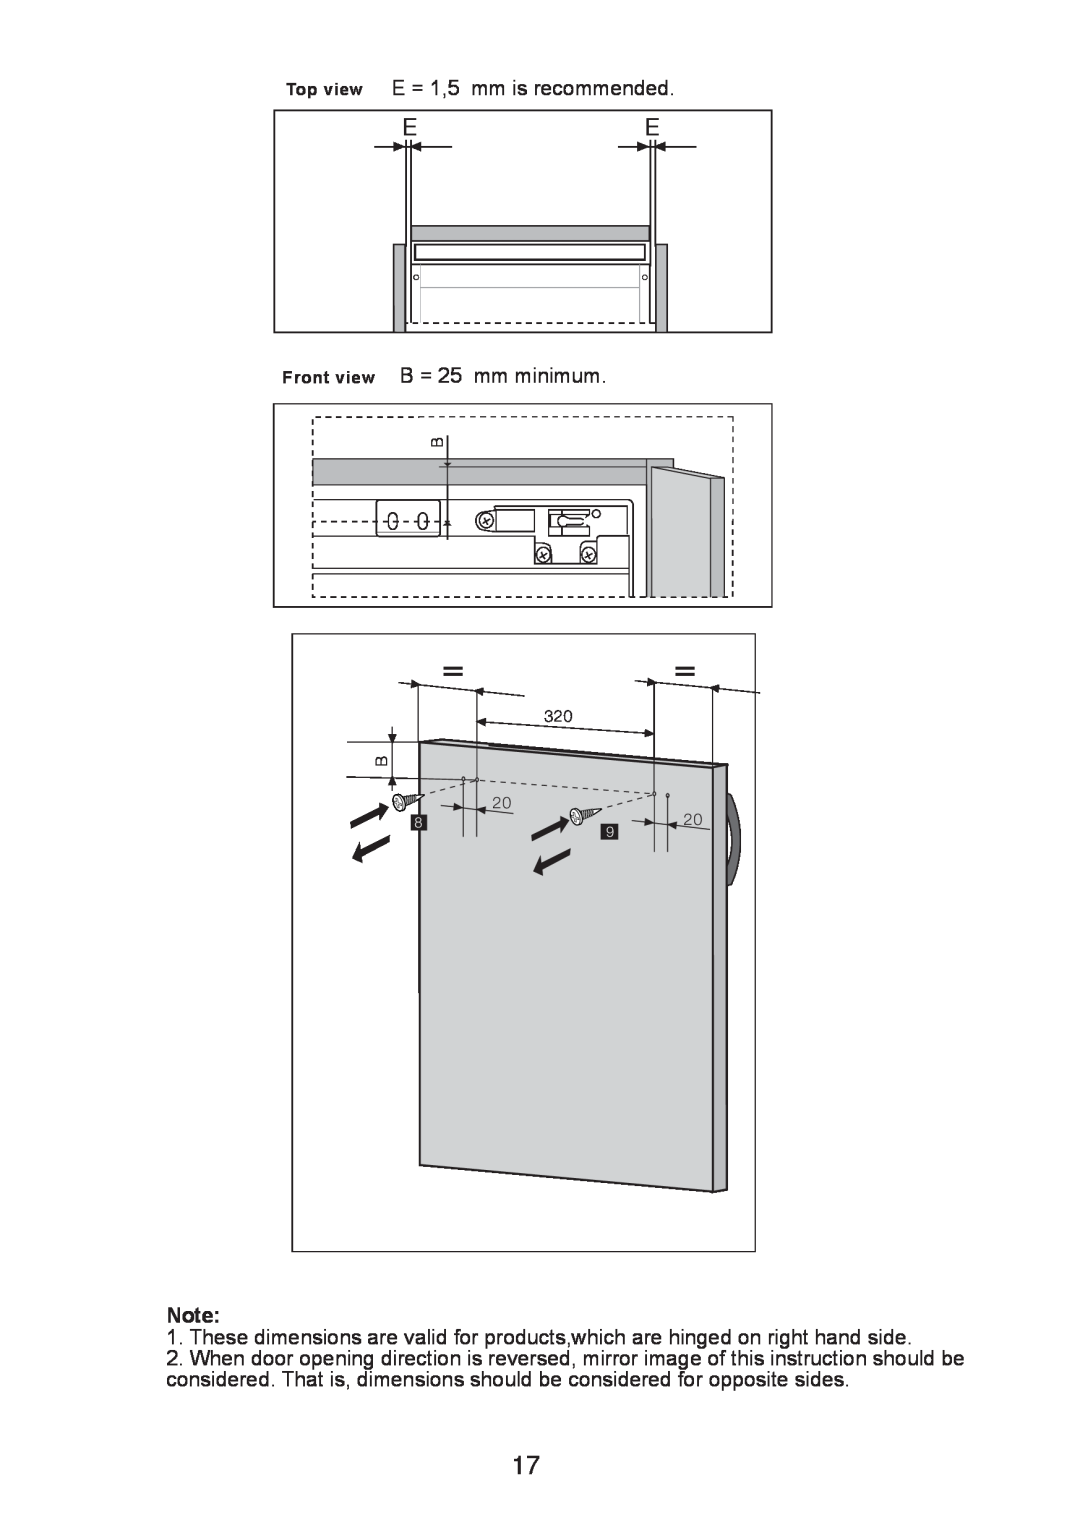 Glen Dimplex Home Appliances Ltd BE813 manual Top view E = 1,5 mm is recommended, B = 25 mm minimum, Front view 